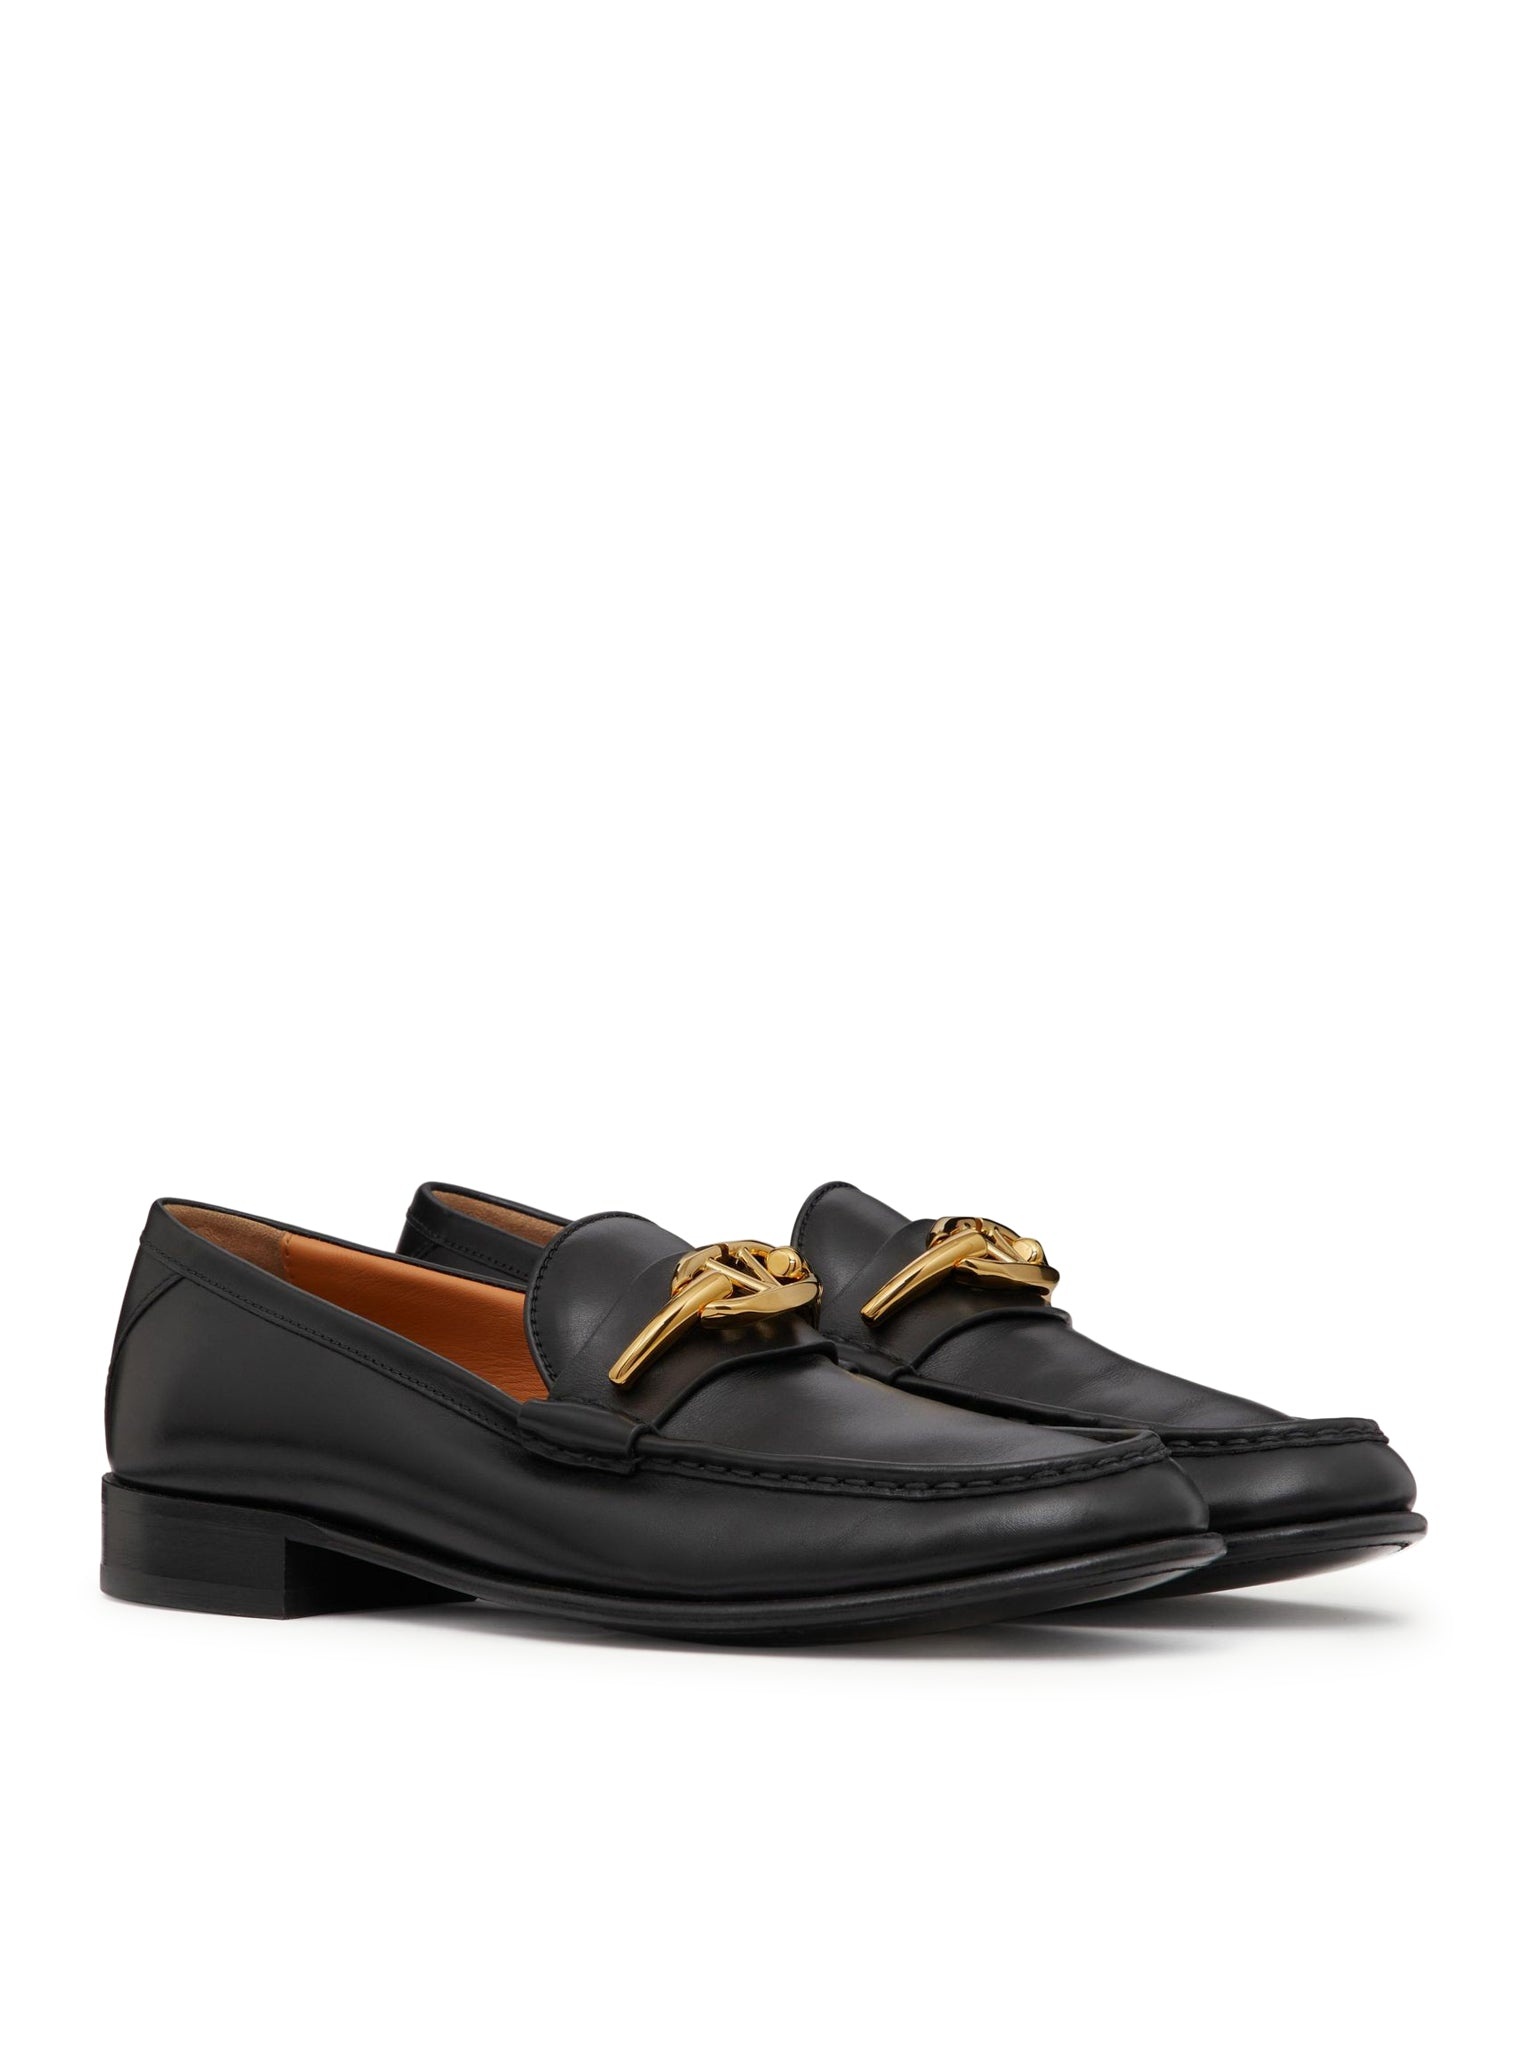 VLOGO THE BOLD EDITION LOAFERS IN CALFSKIN - 3